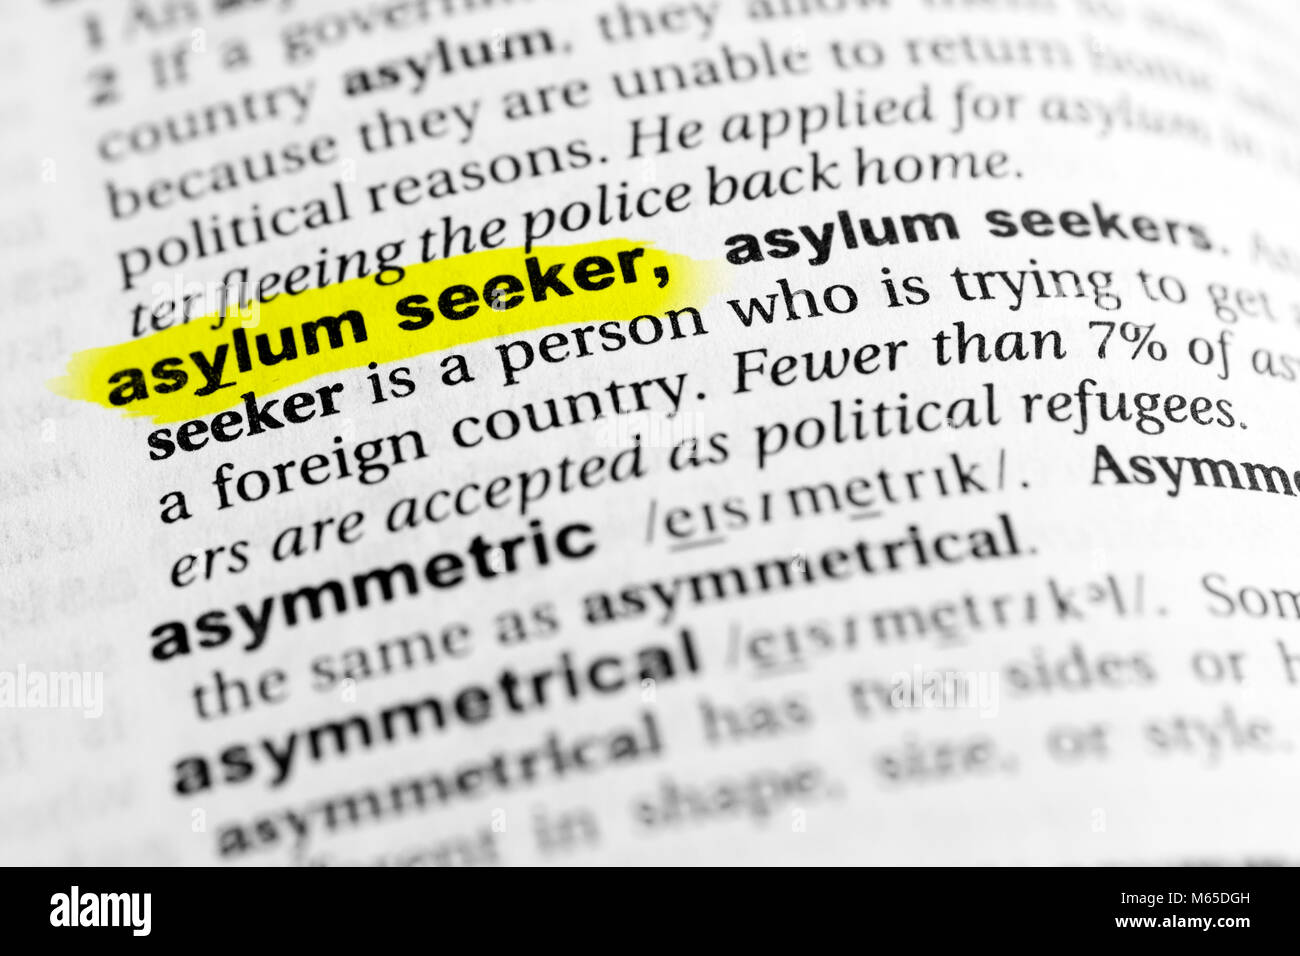 highlighted english word "asylum seeker" and its definition in the